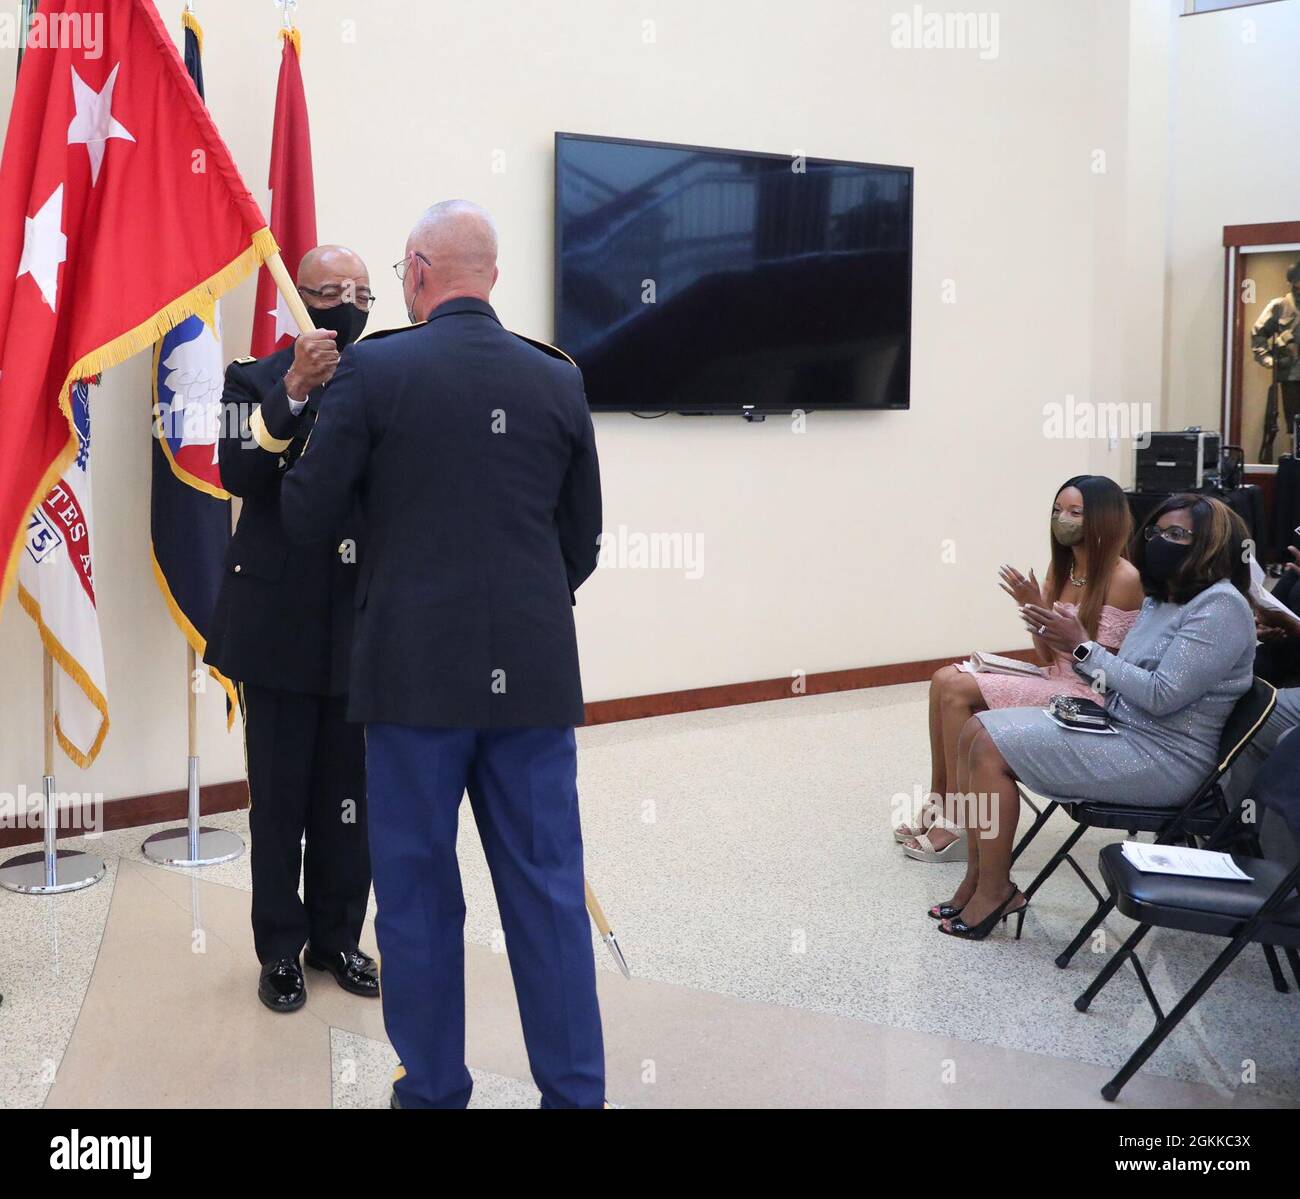 U.S. Army Reserve Lt. Gen. A.C. Roper receives the three-star flag from Command Sergeant Major (Ret) Jeffrey Darlington symbolizing promotion to the rank of lieutenant general during a promotion and oath of office ceremony for Roper at Fort Bragg, N.C., May 14, 2021.  In the early 20th century the War Department designed the flags for their generals and admirals. Red flags with white stars were for the Army; navy blue for the Navy; scarlet, for the Marines; and more recently, ultramarine blue for the Air Force. Today, it is customary for the general’s flag to be posted outside his or her offic Stock Photo